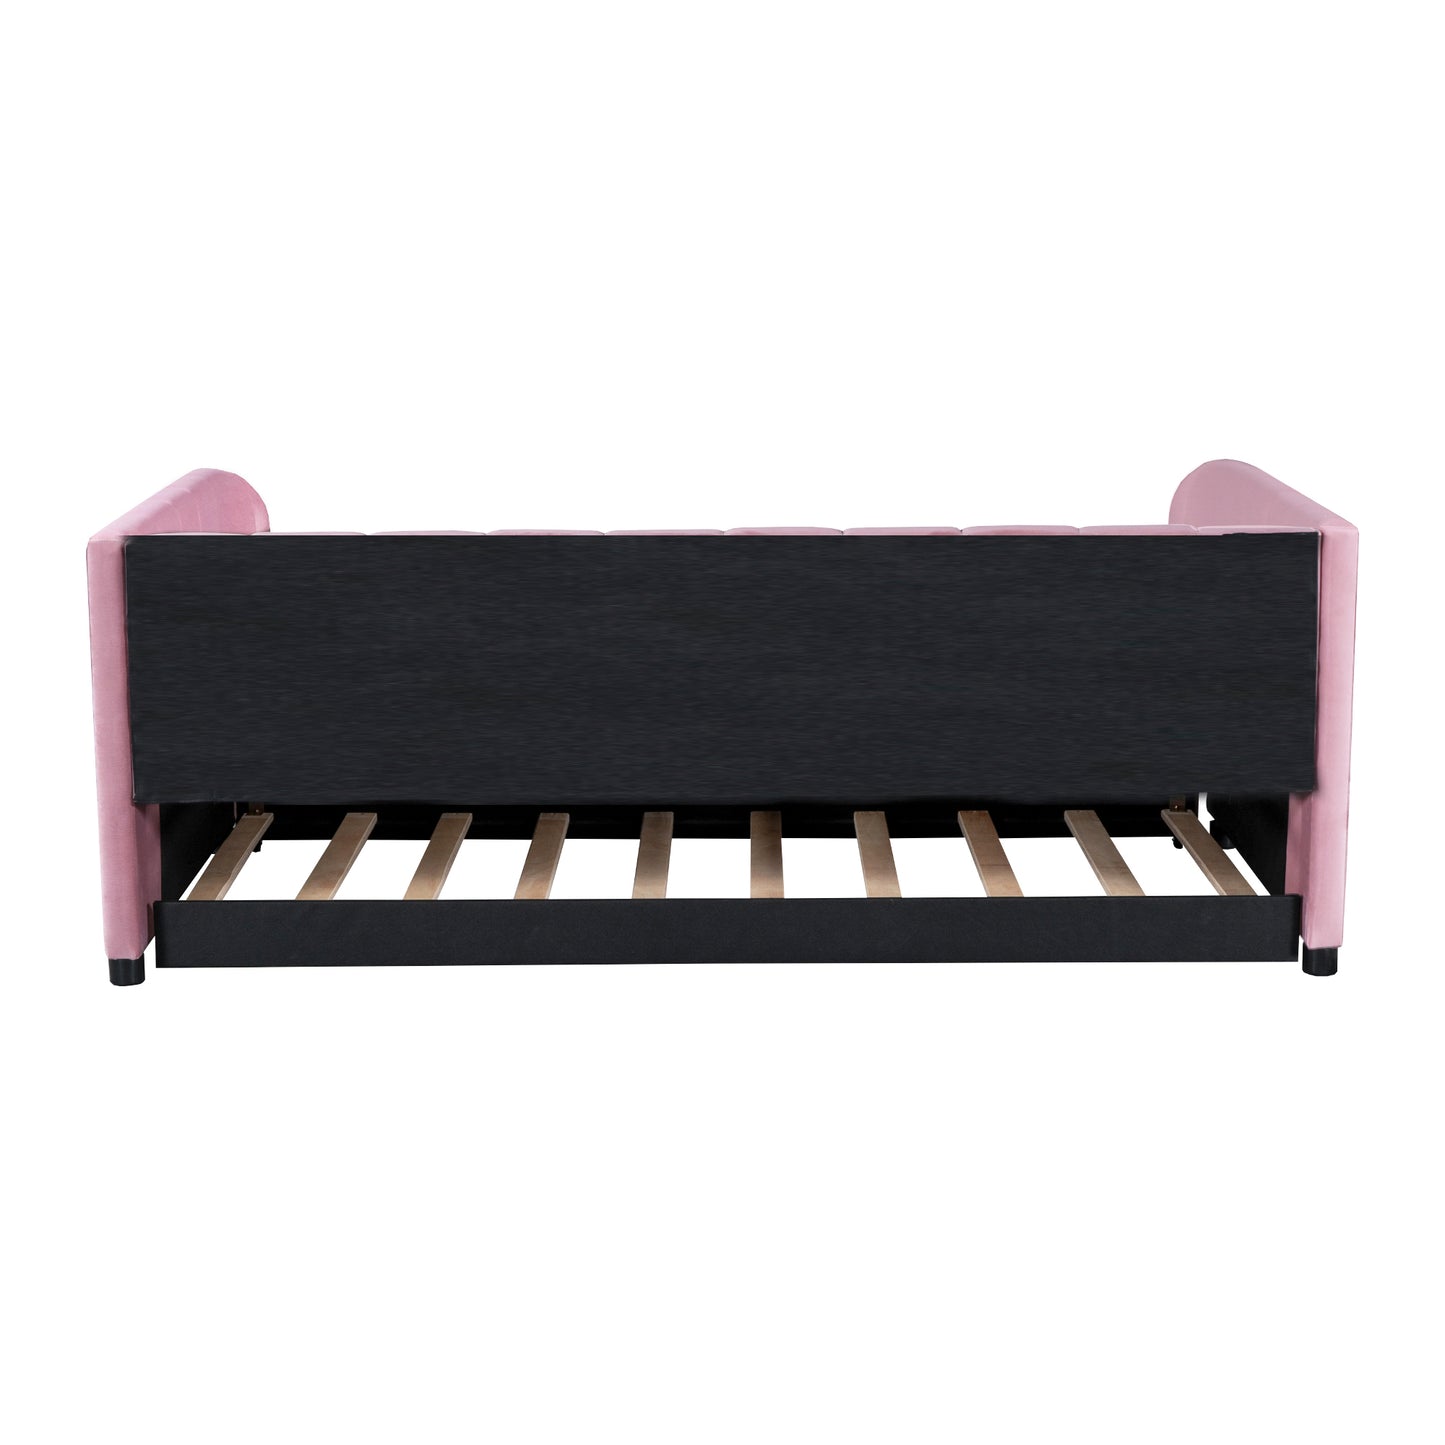 Twin Size Upholstered Daybed with Ergonomic Design Backrest and Trundle, Pink